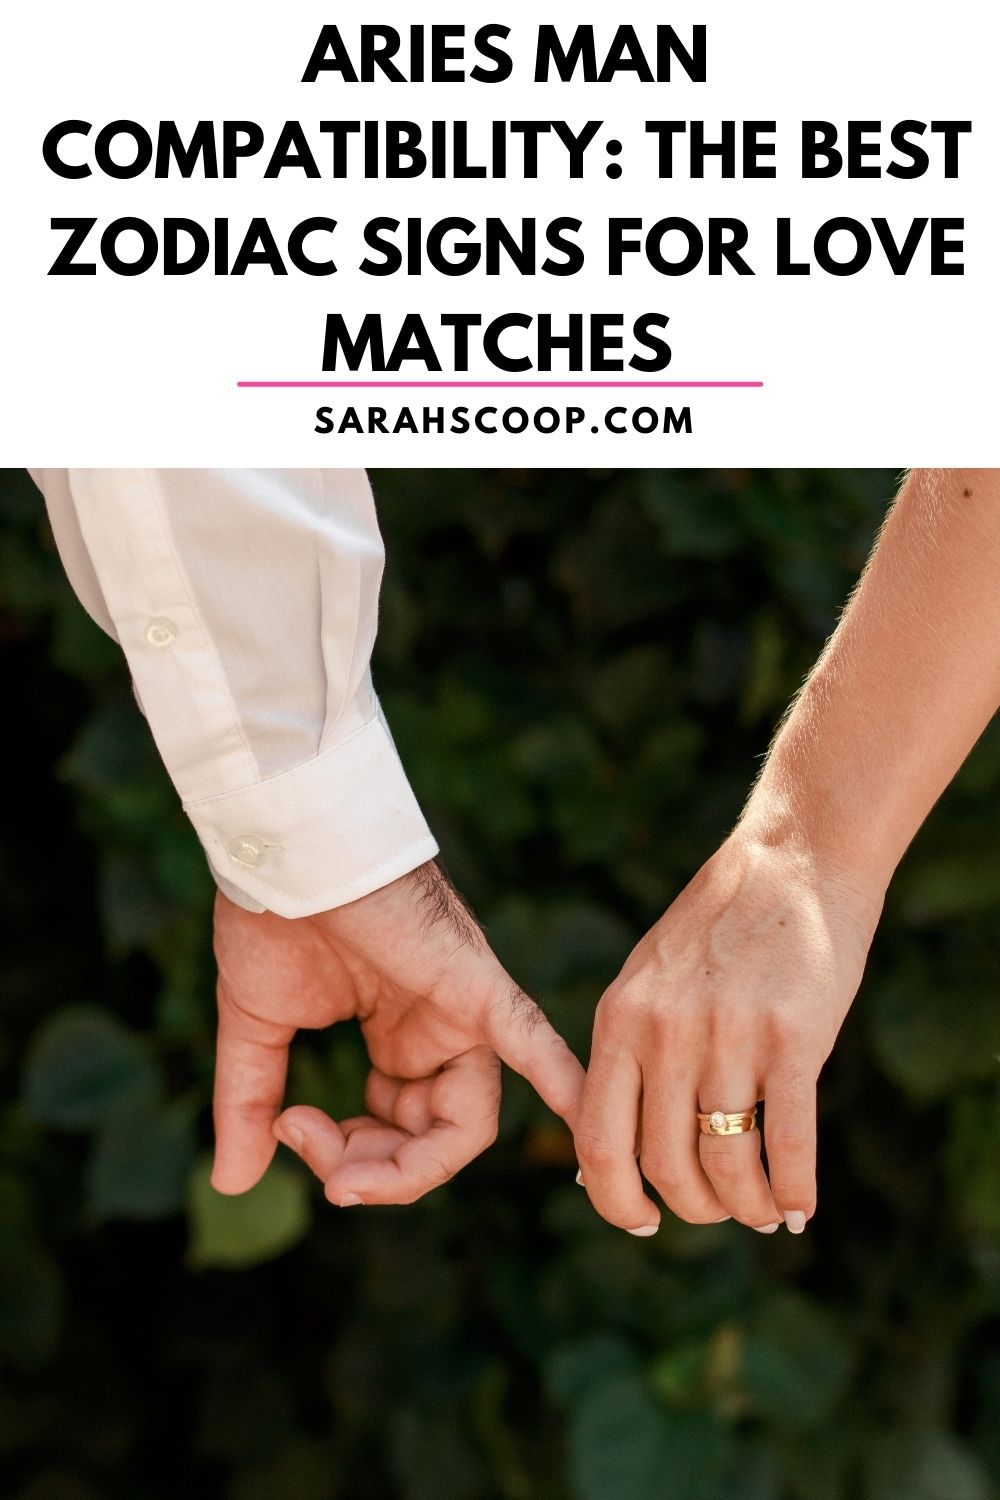 Best Love Matches For Aries Man